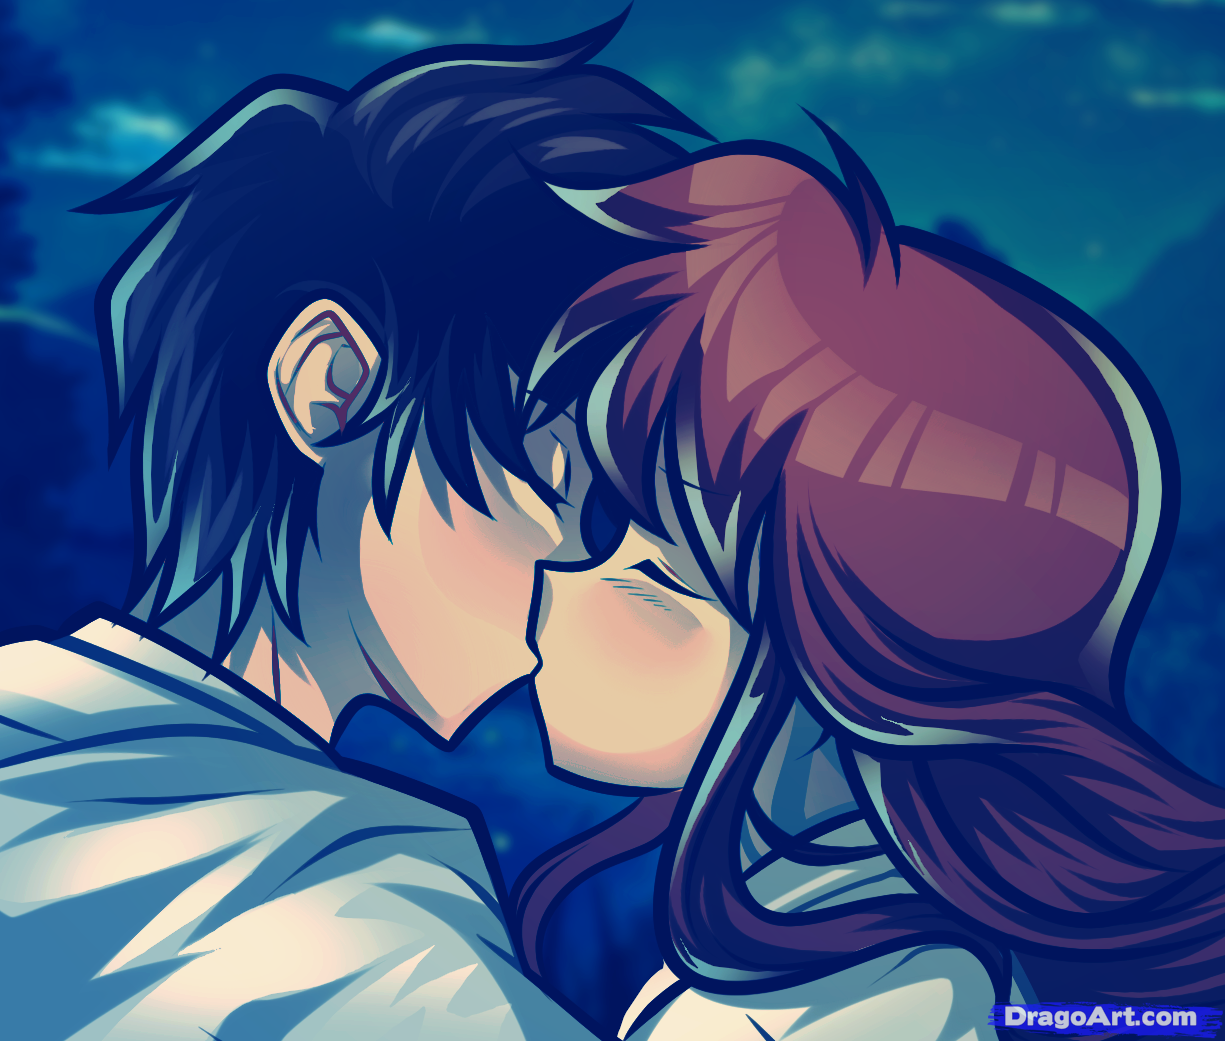 Anime kissing couple wallpaper by _Kith_ - Download on ZEDGE™